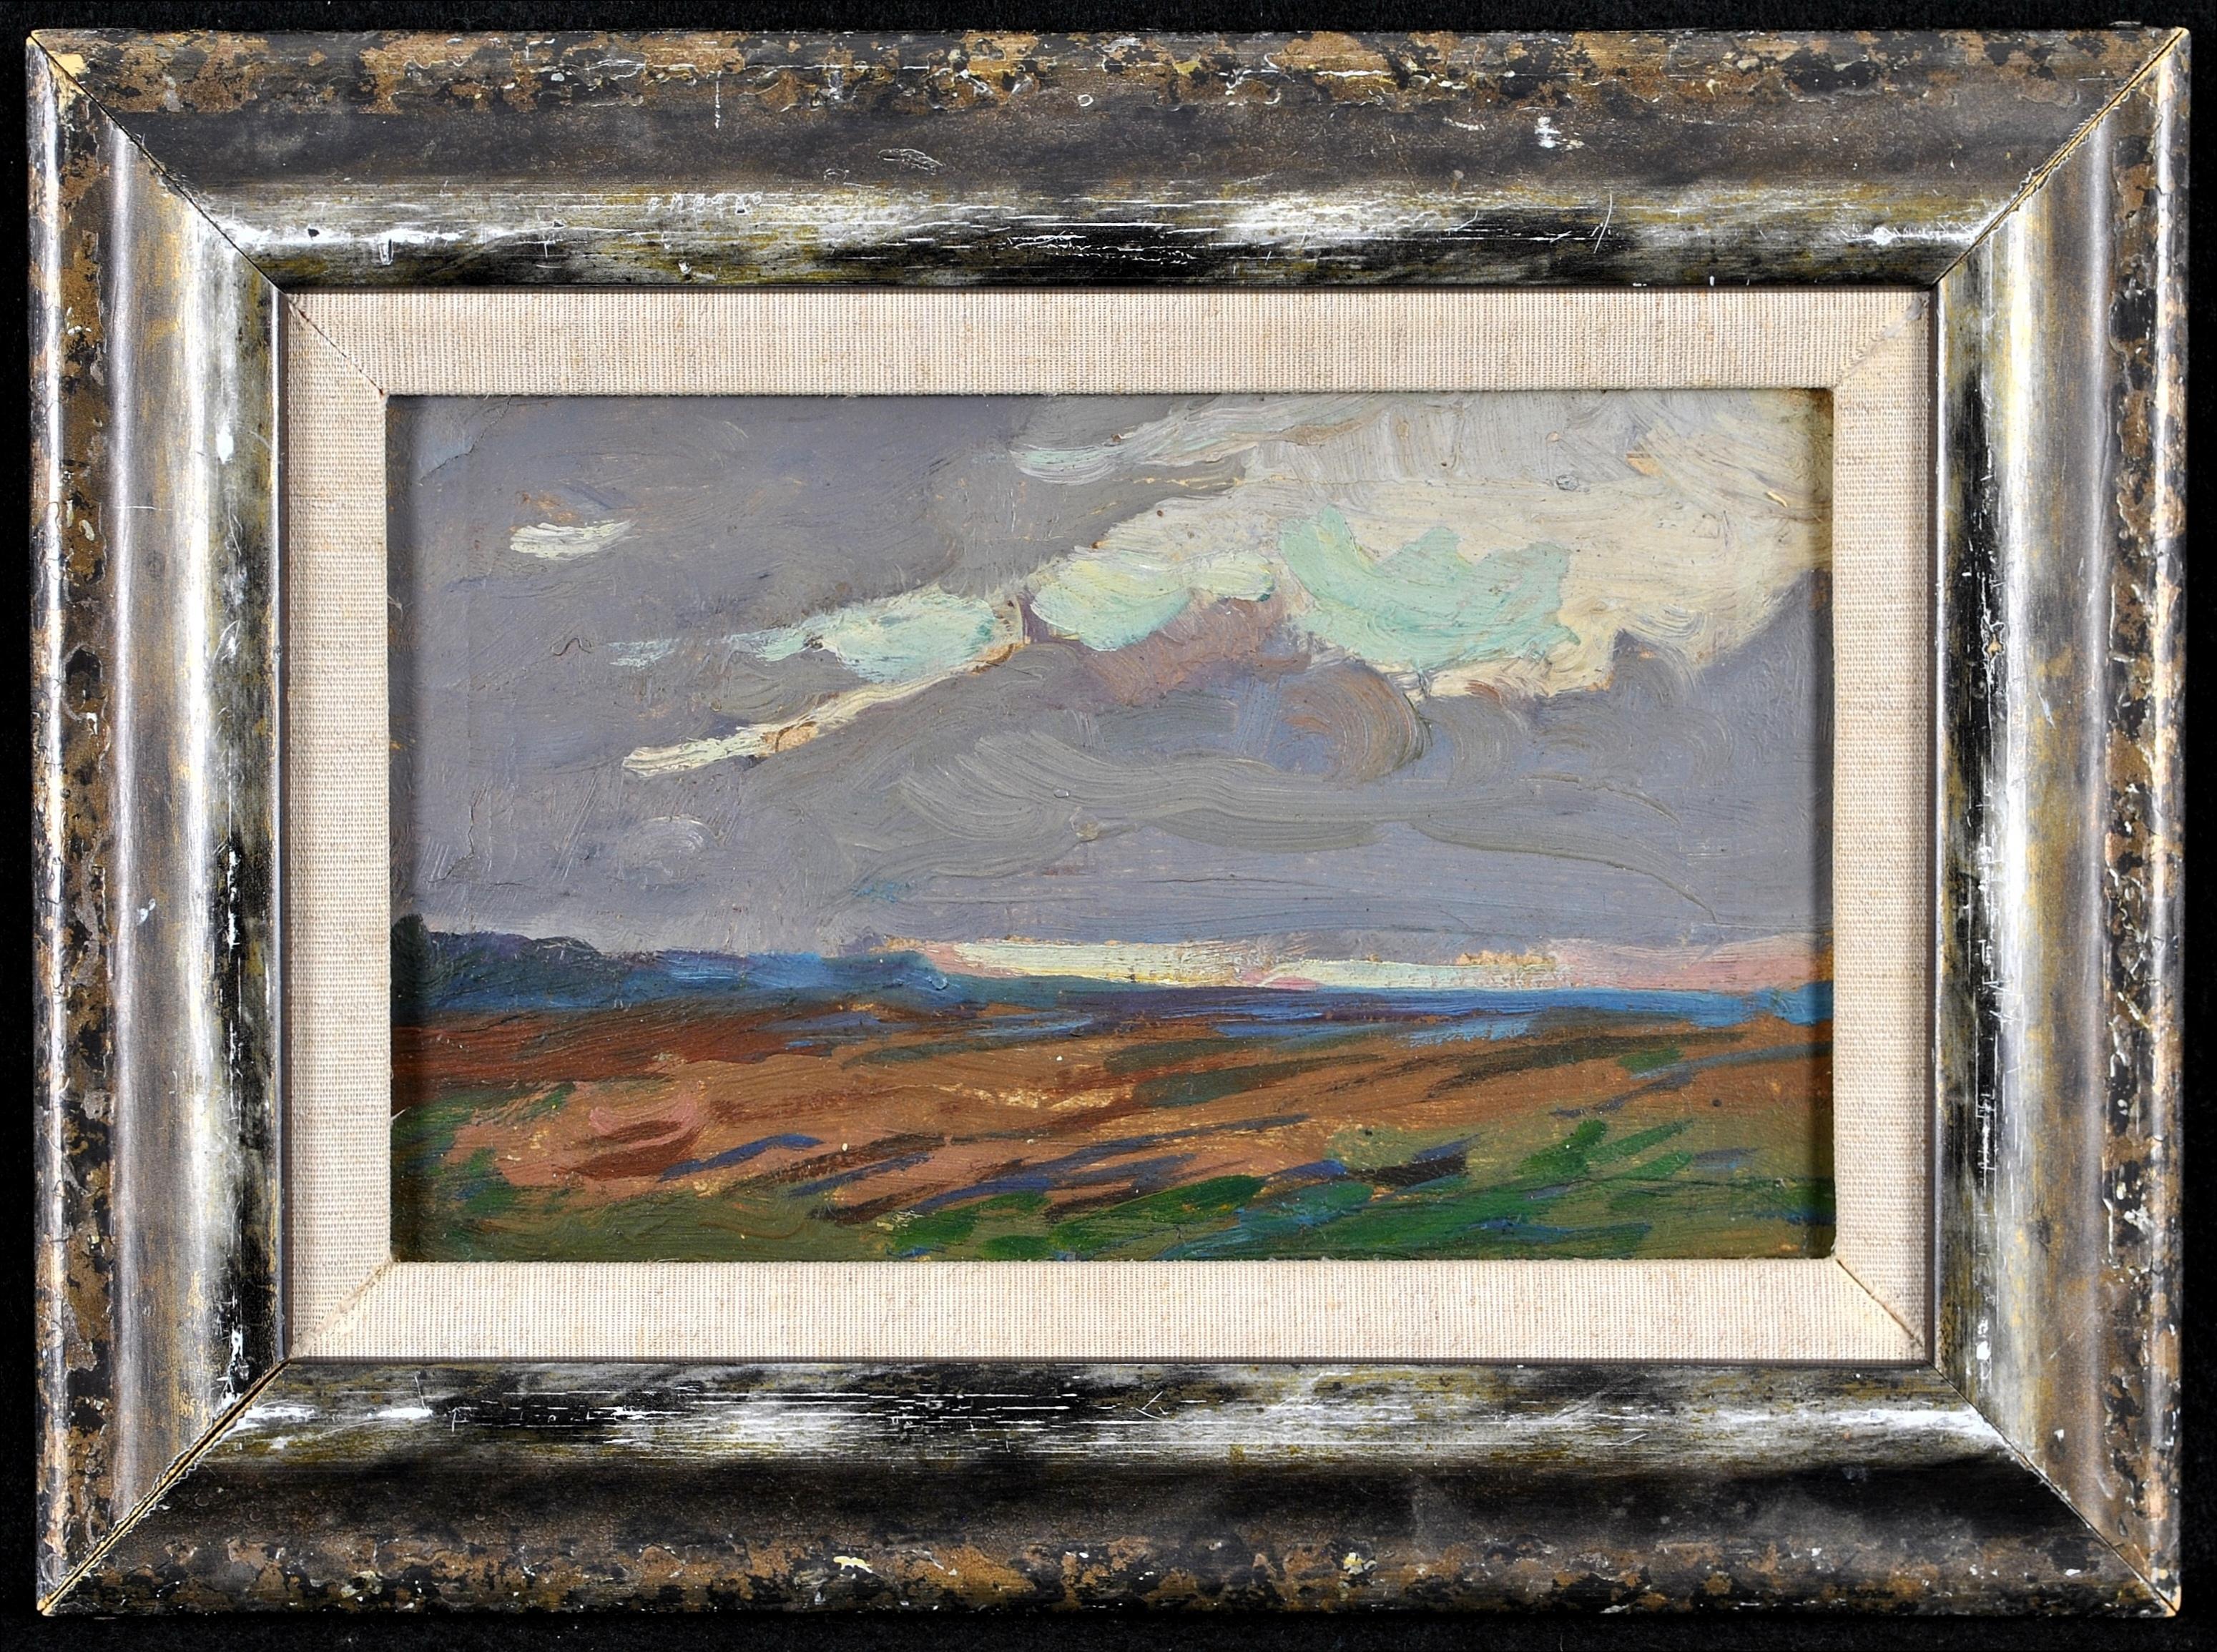 A beautiful early 20th century Irish impressionist oil on board depicting an atmospheric landscape at sunset. Excellent quality work painted with lovely loose impasto brushstrokes. Framed.

Artist: Irish School, early 20th century
Title: Sunset